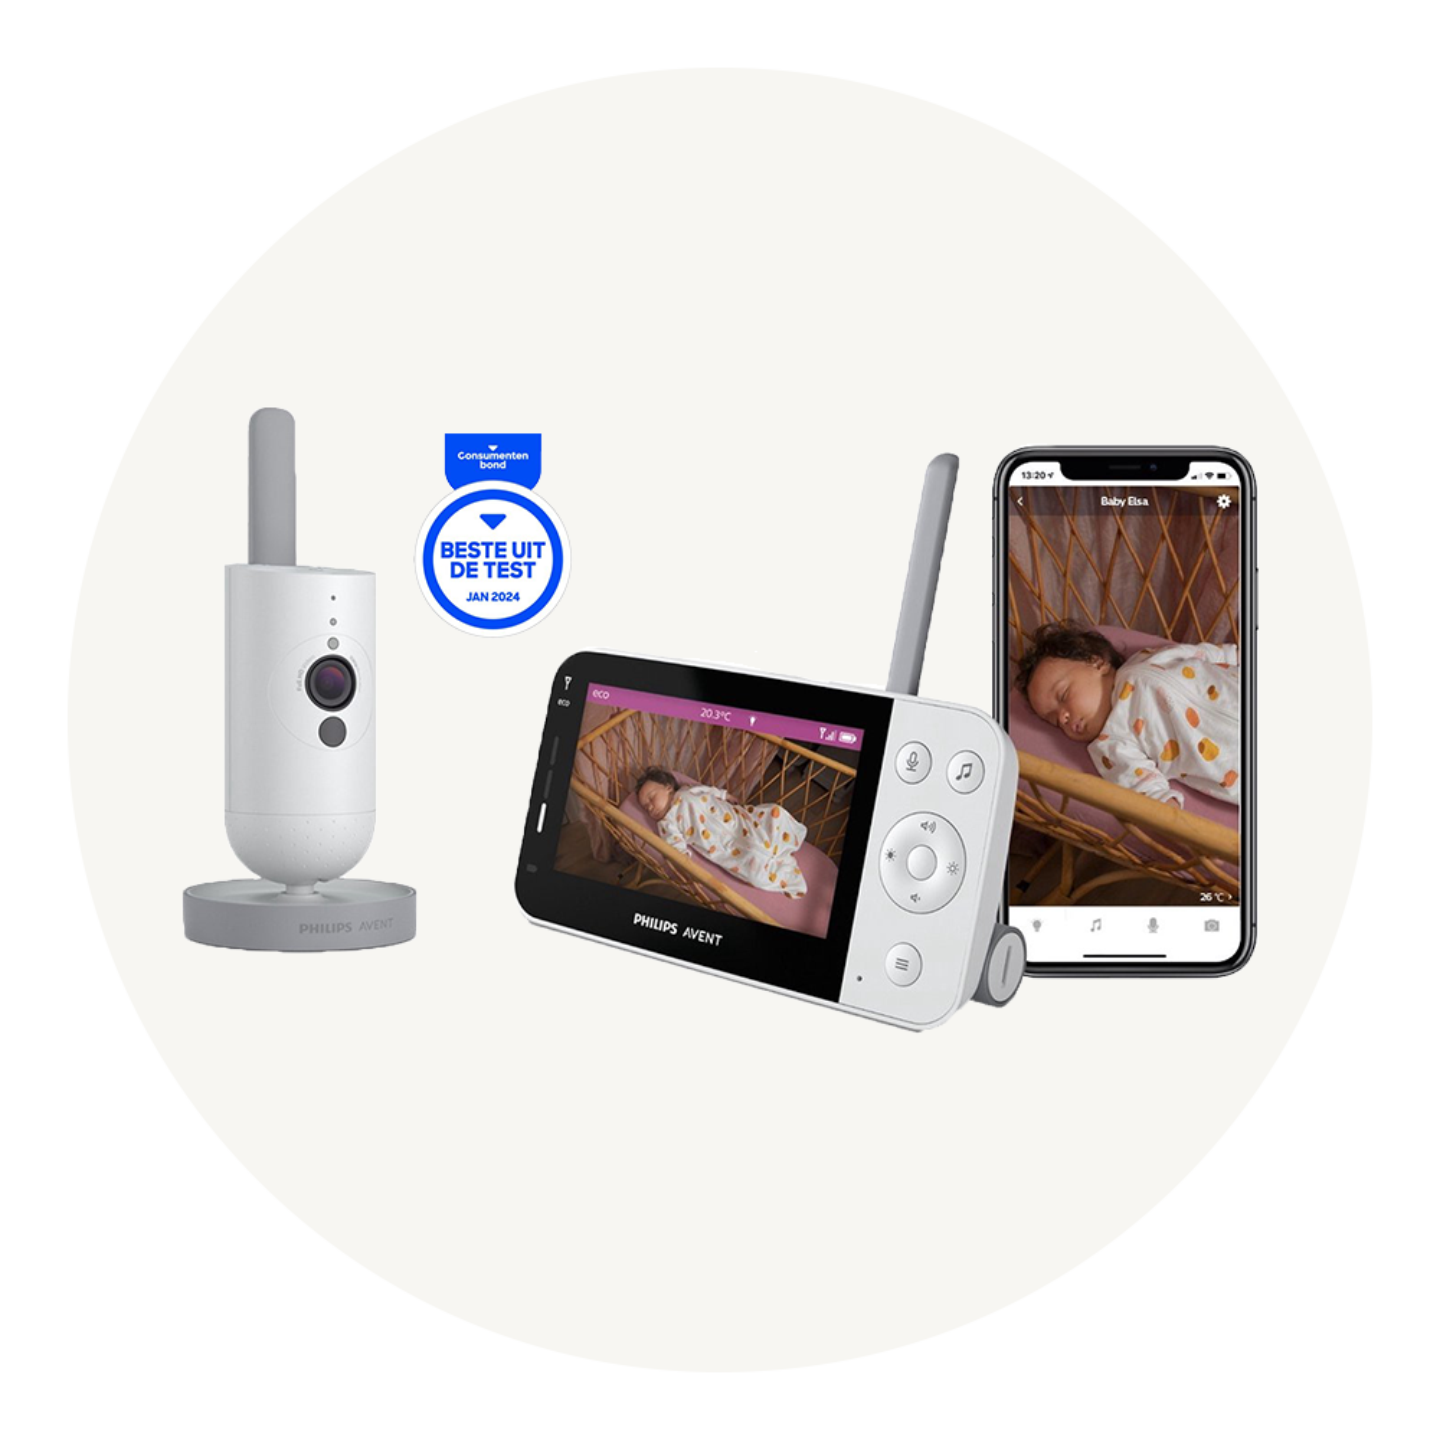 Philips_Avent_Connected.jpg.png